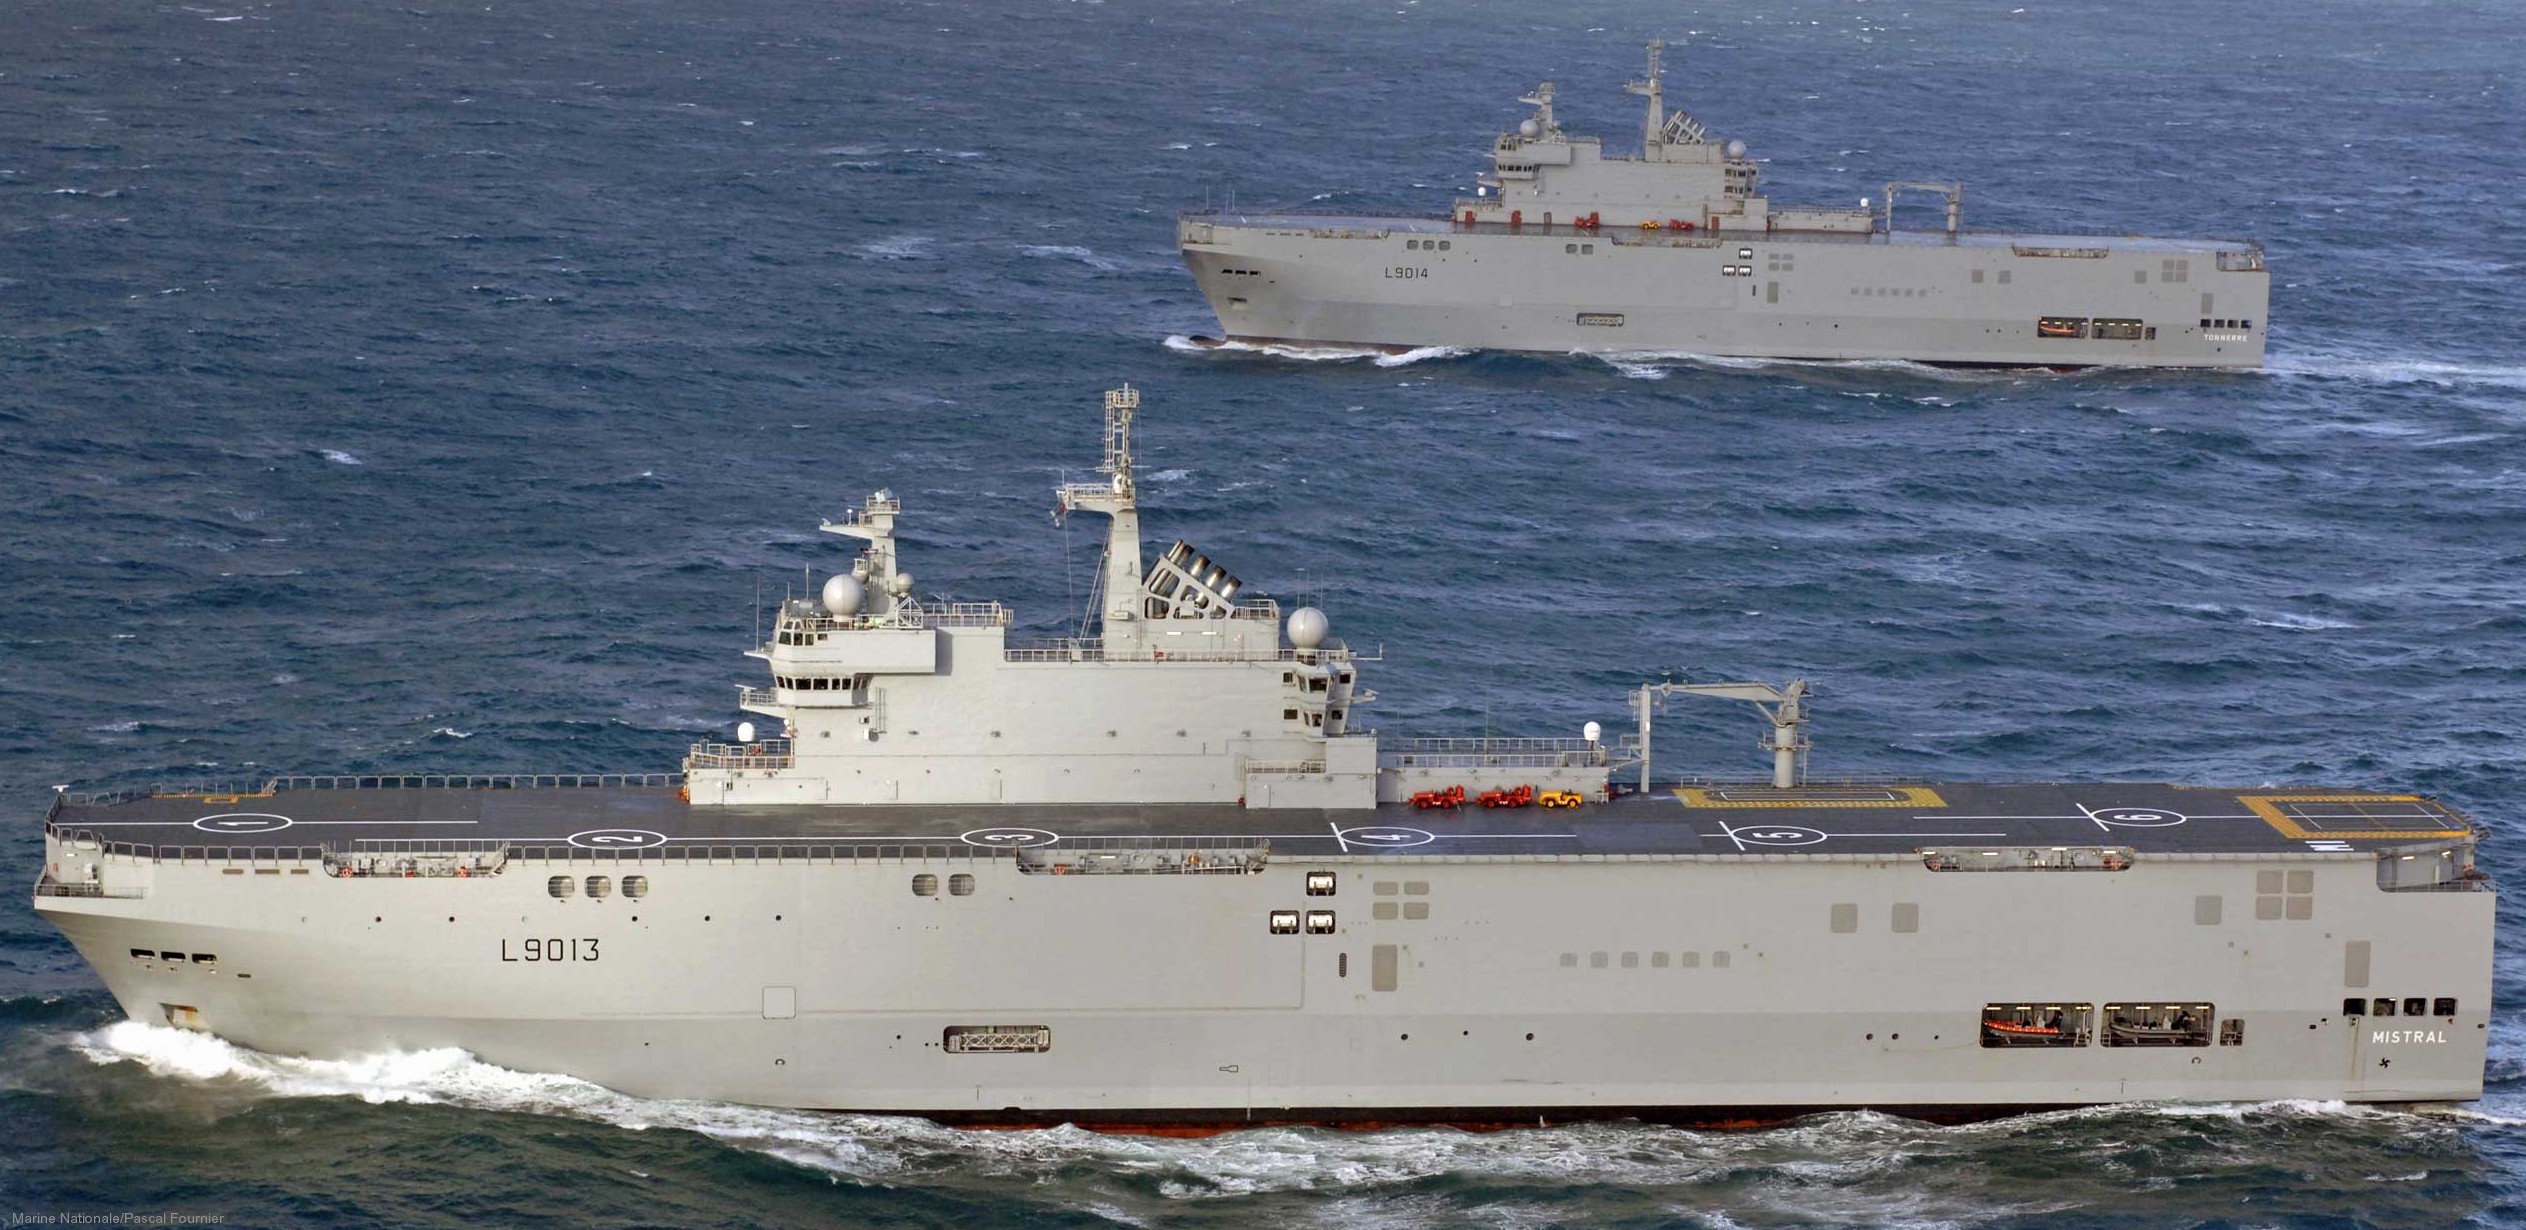 l-9013 fs mistral amphibious assault command ship french navy marine nationale 10